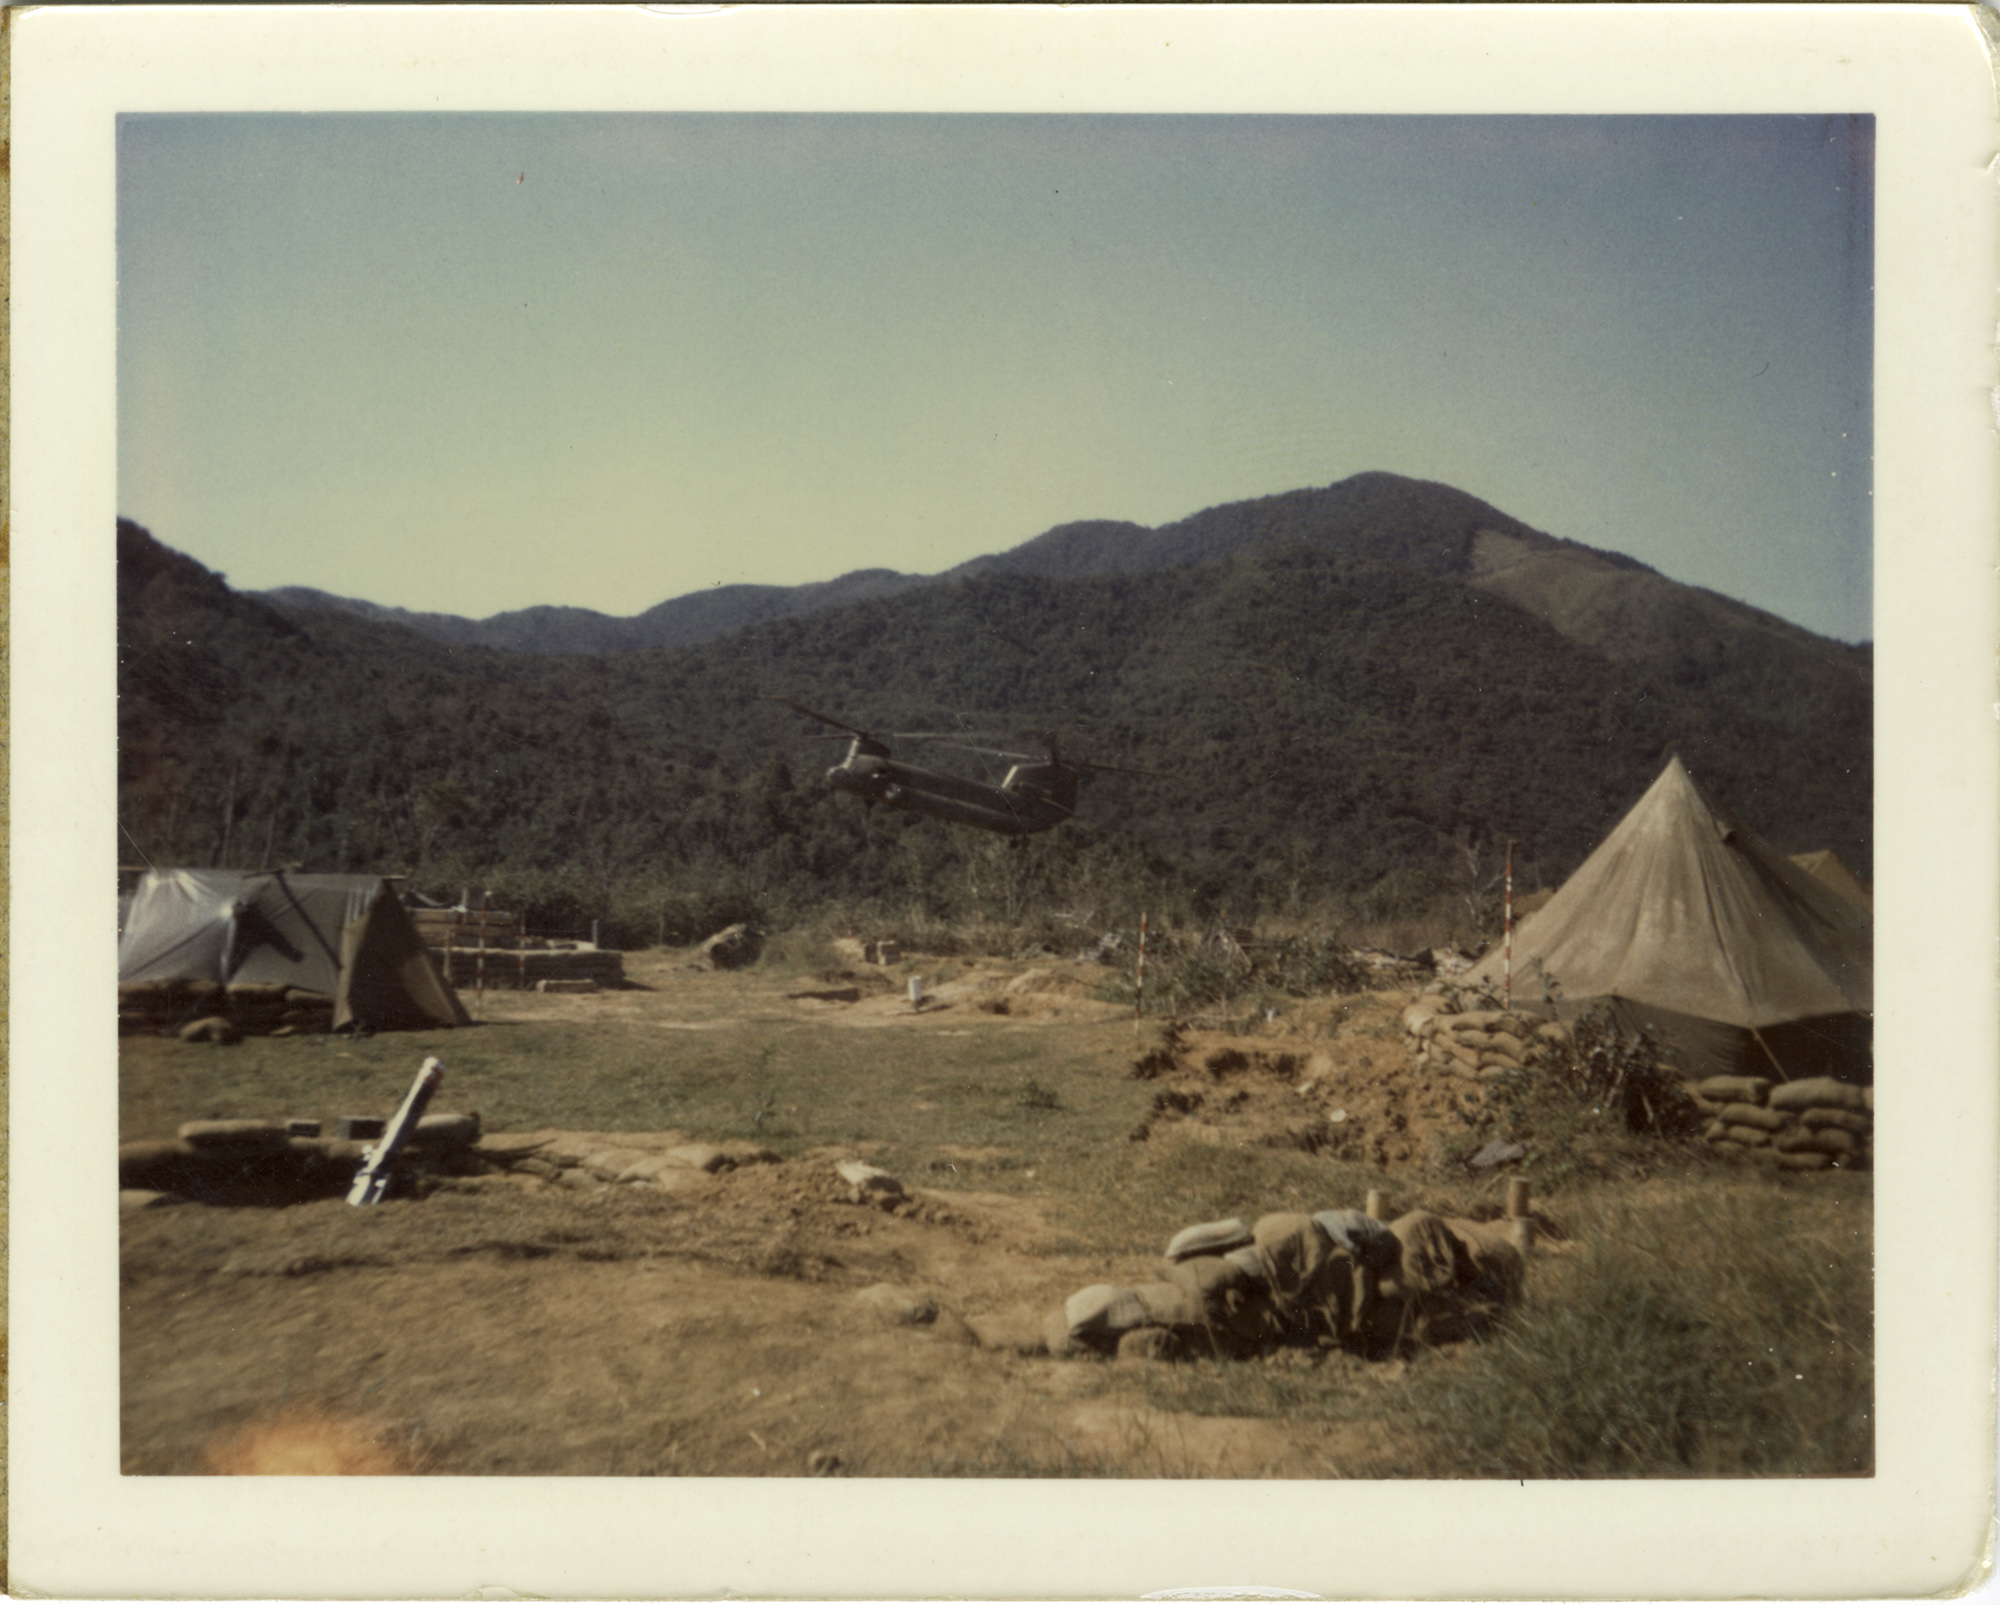 A military base with tents, a helicopter, and mountains in the background.